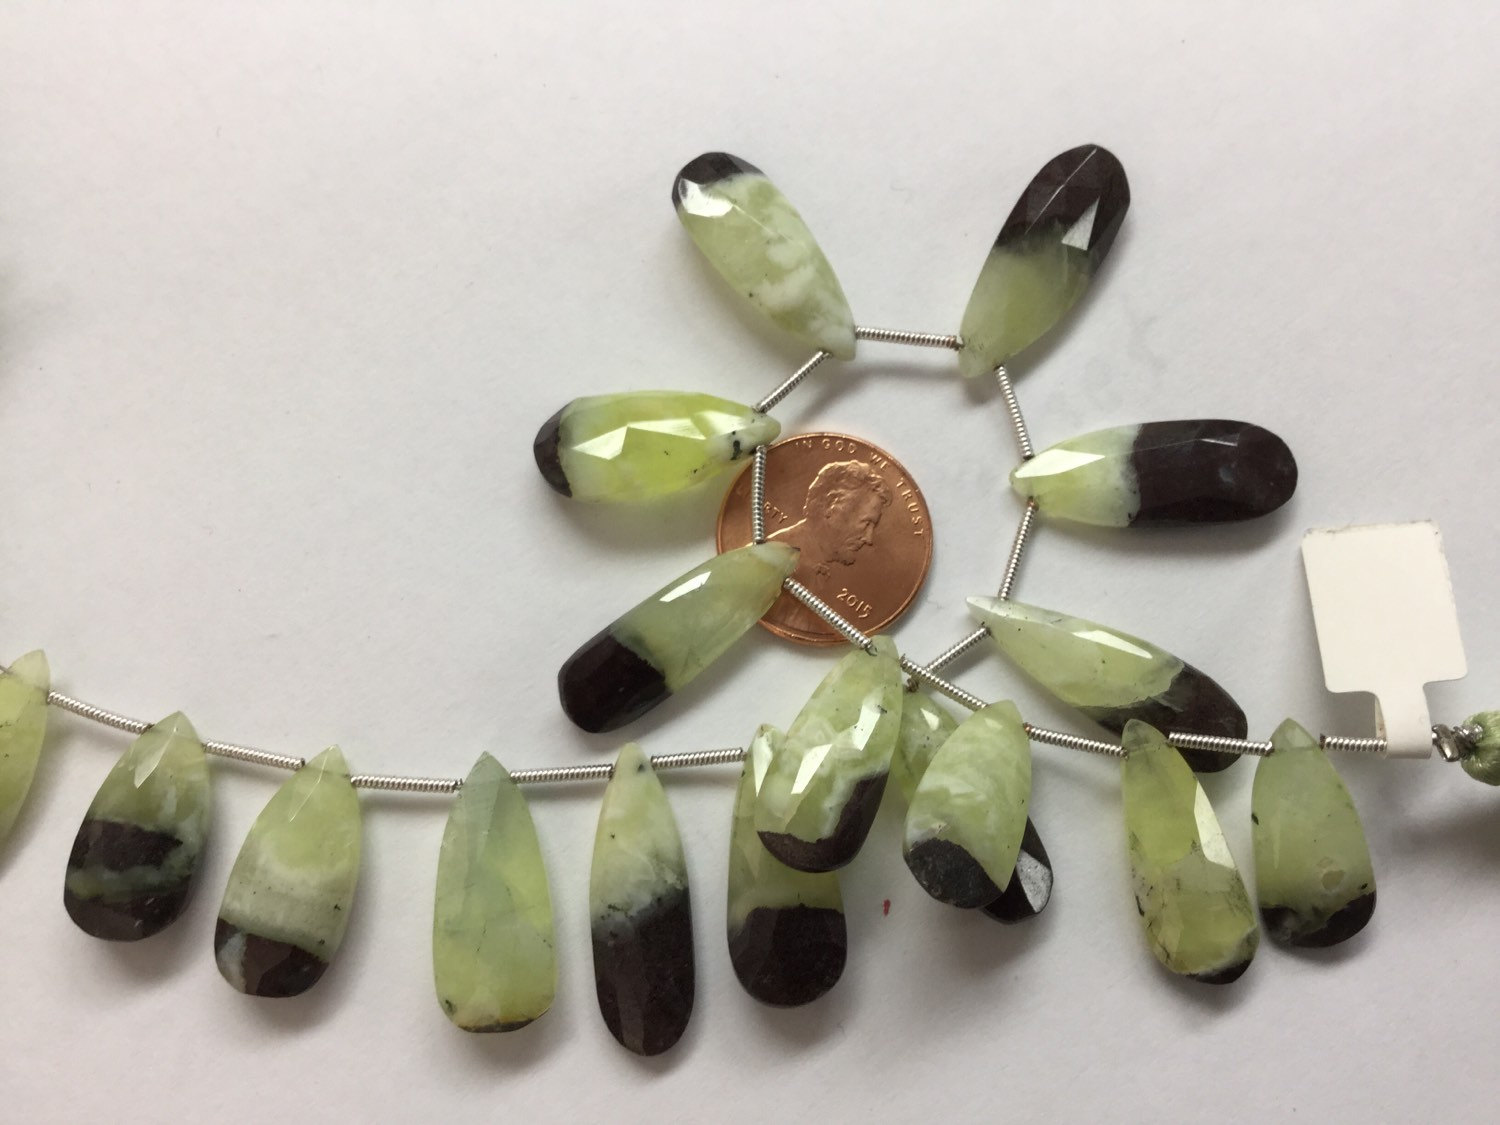 Natural Prehnite Pears Faceted